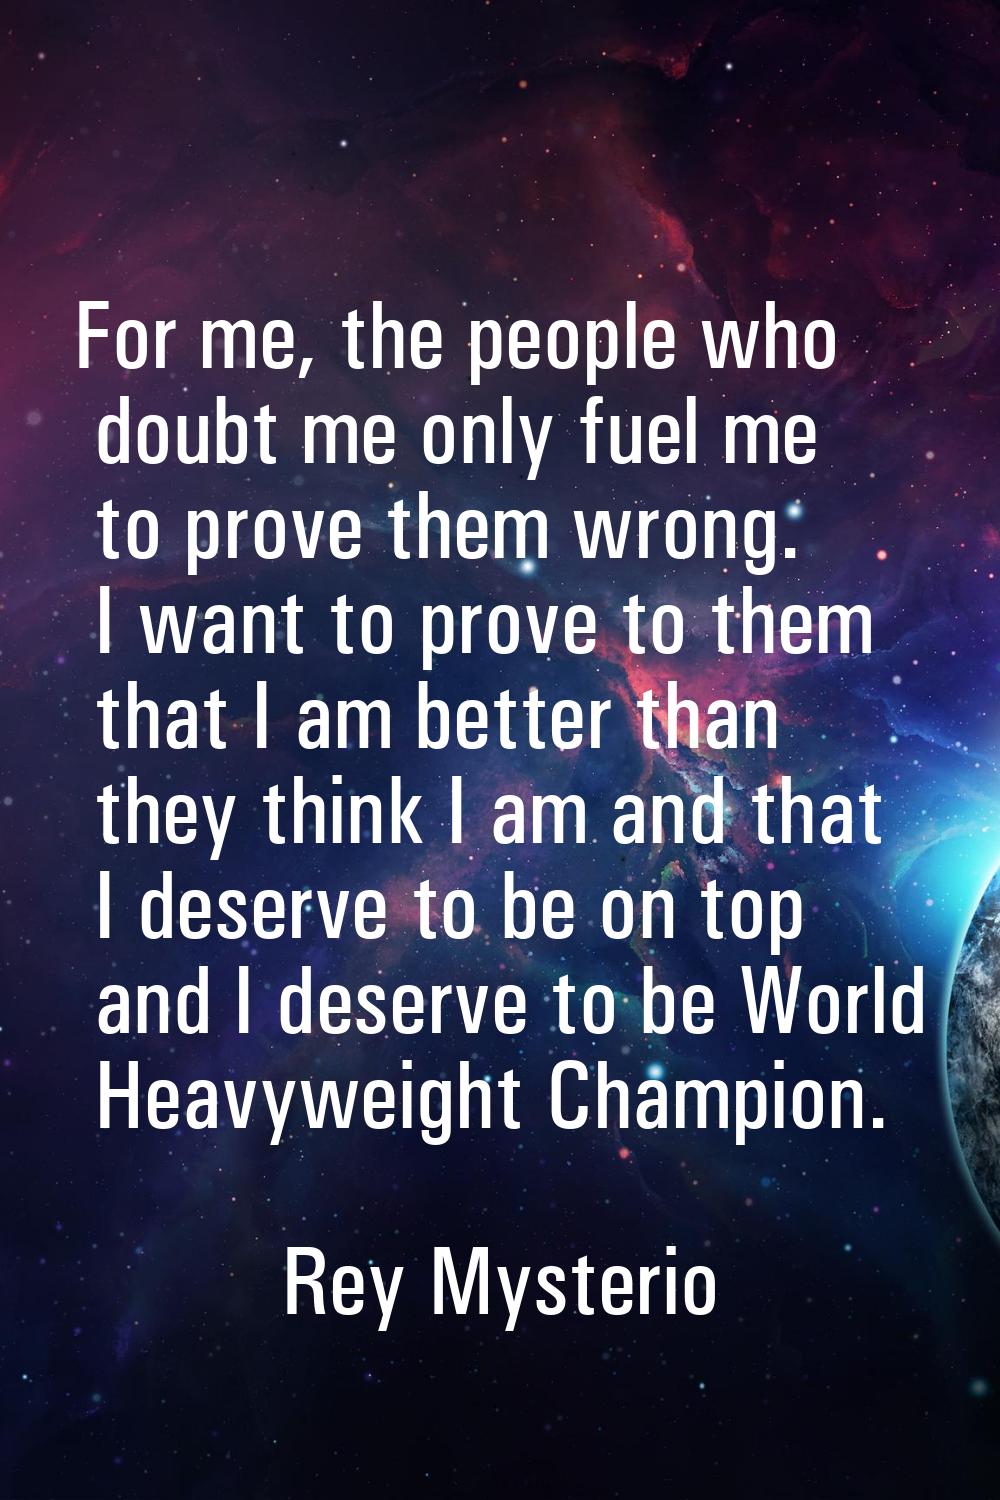 For me, the people who doubt me only fuel me to prove them wrong. I want to prove to them that I am